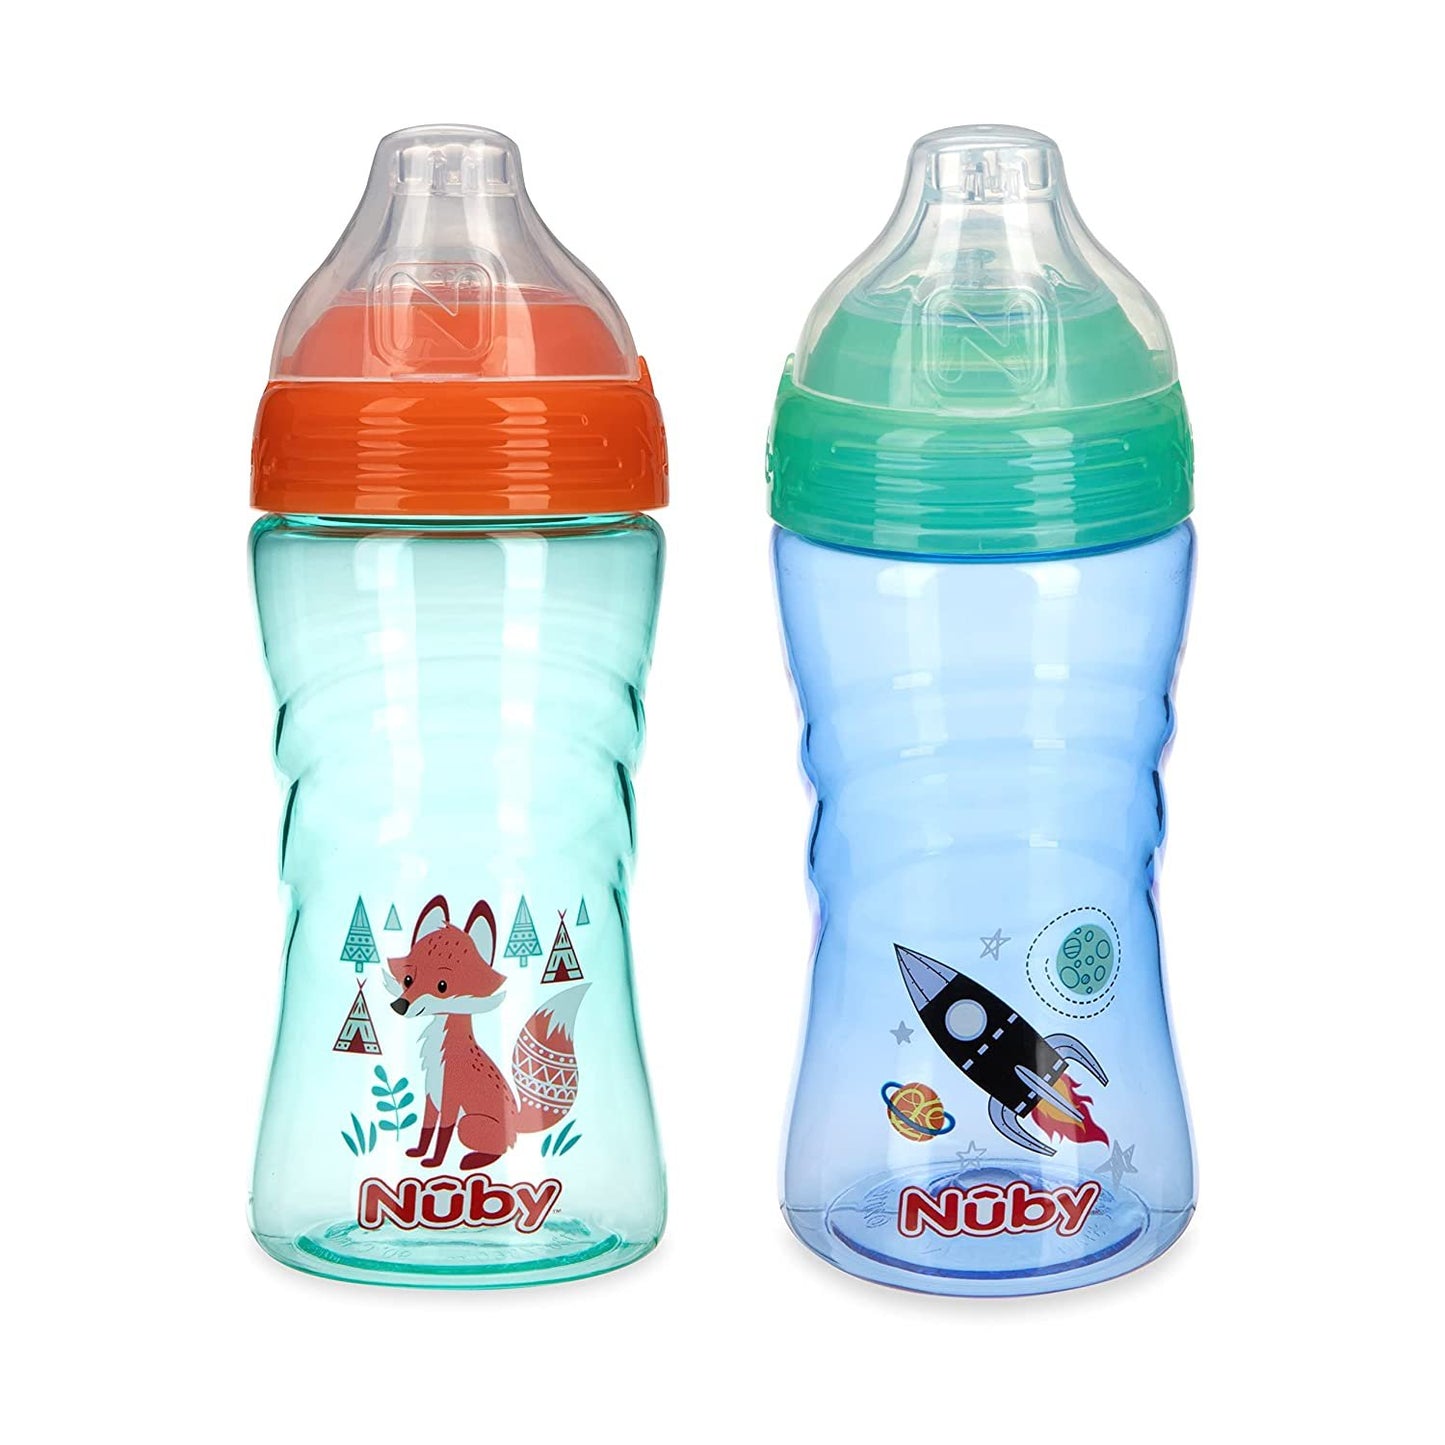 Nuby 2 Pack No Spill Printed Thirsty Kids No-Spill Sip-it Sport Cup with Soft Spout and Lid - 12oz, 12+ Months, 2 Pack, Print May Vary